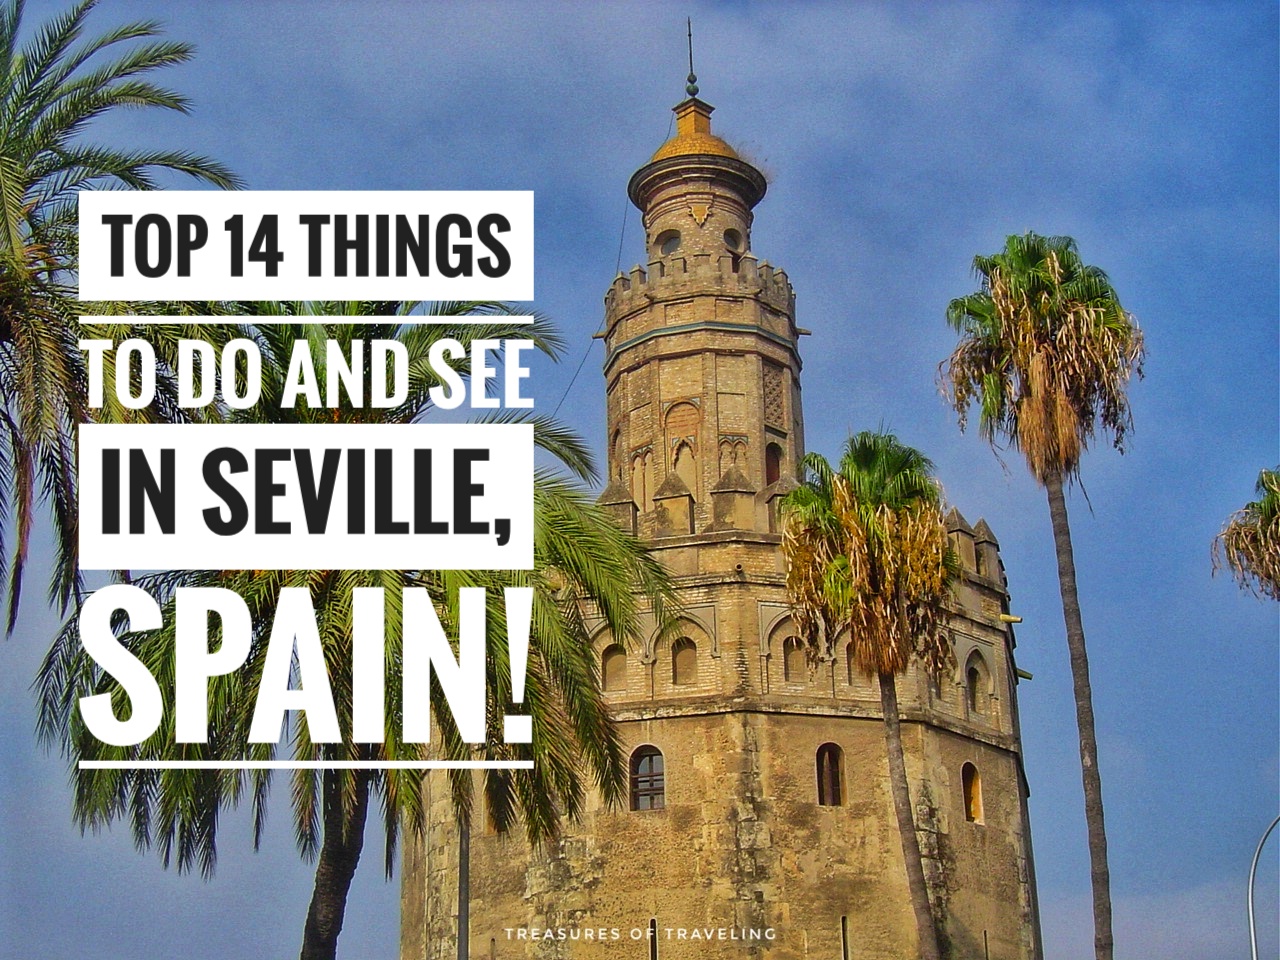 Top 14 Things to Do and See in Seville, Spain!